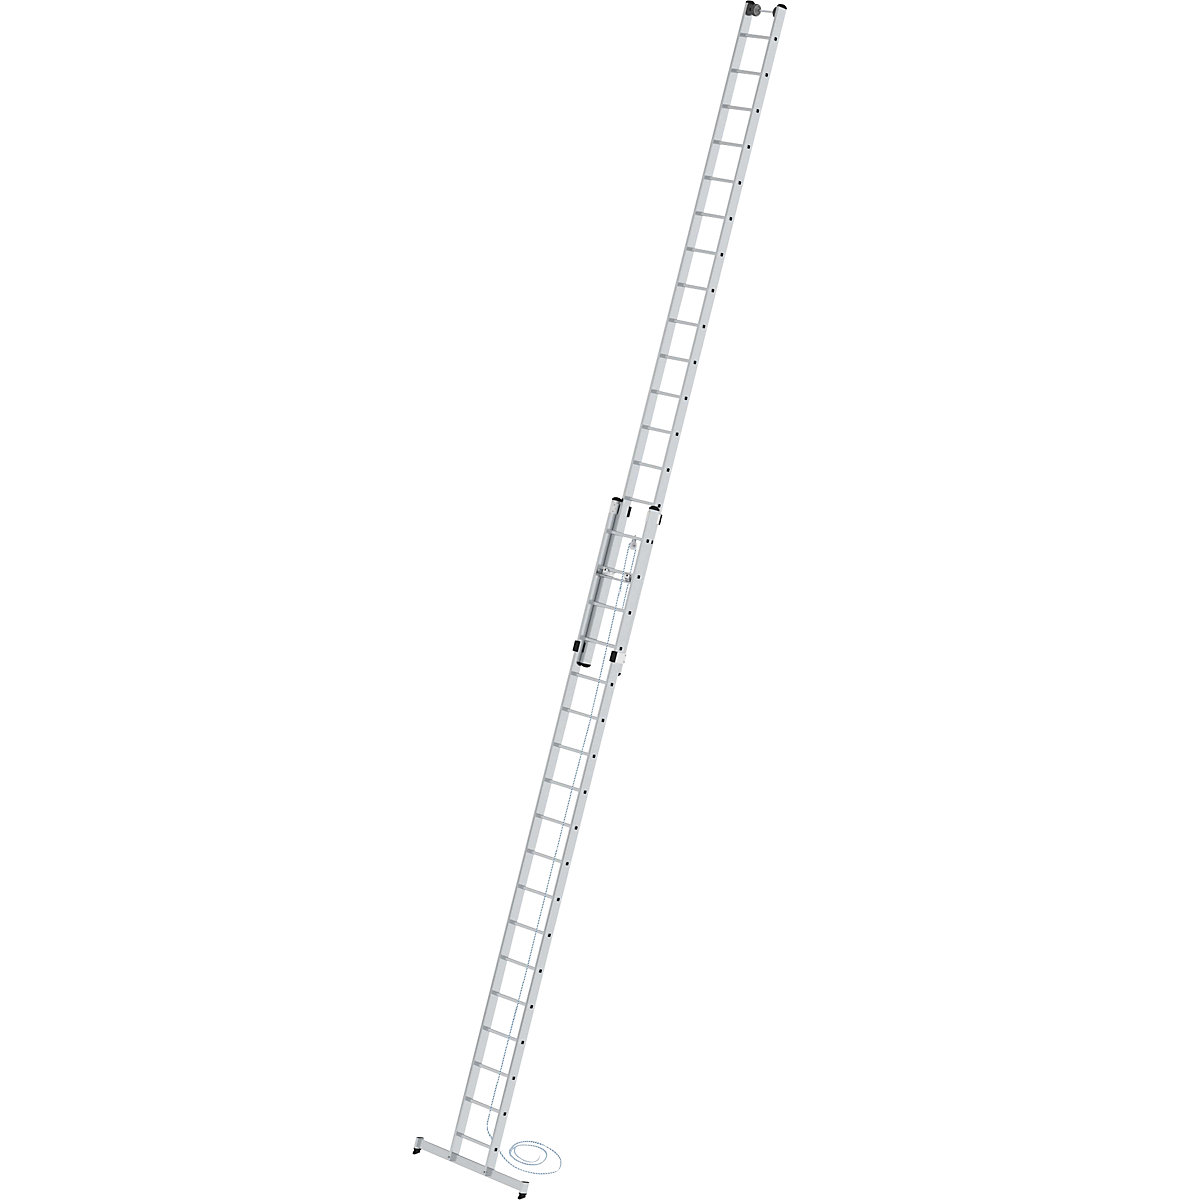 Height adjustable lean-to ladder – MUNK, rope operated extension ladder, 2-part with nivello® support, 2 x 18 rungs-6